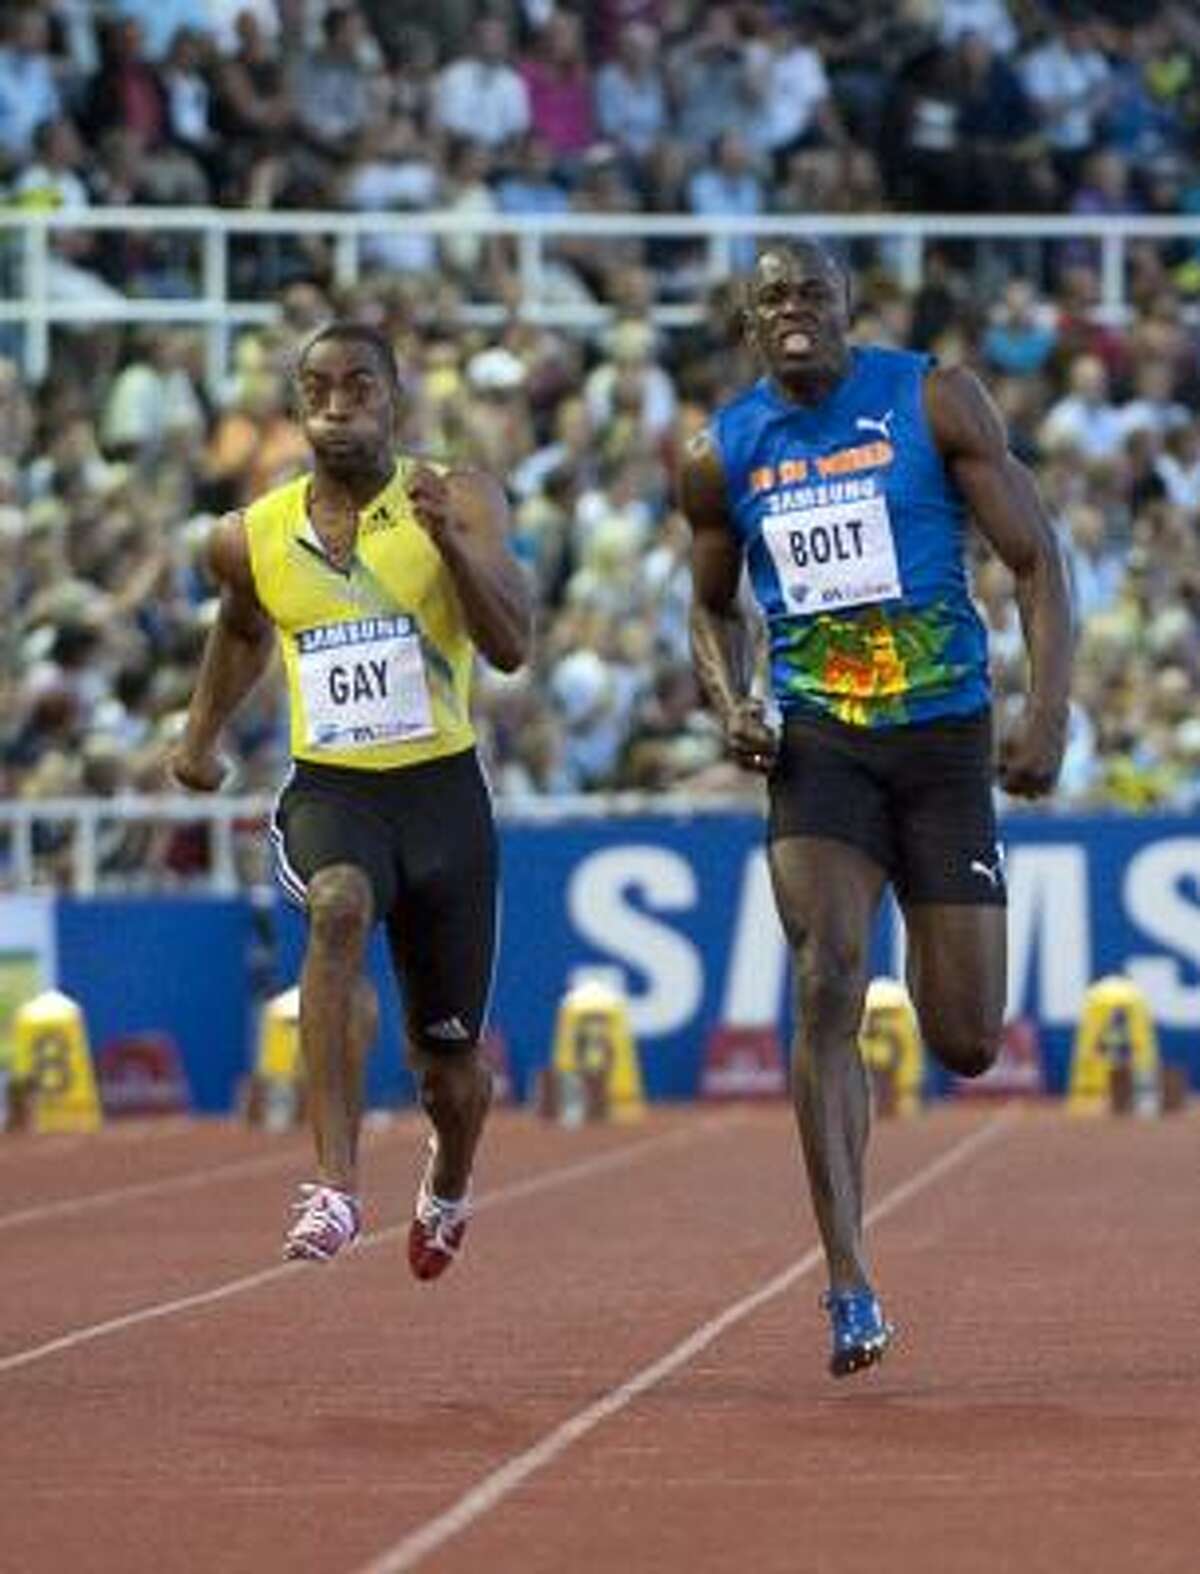 Tyson Gay of the U.S., left, posted a 9.84 en route to victory over the seemingly unbeatable Usain Bolt.